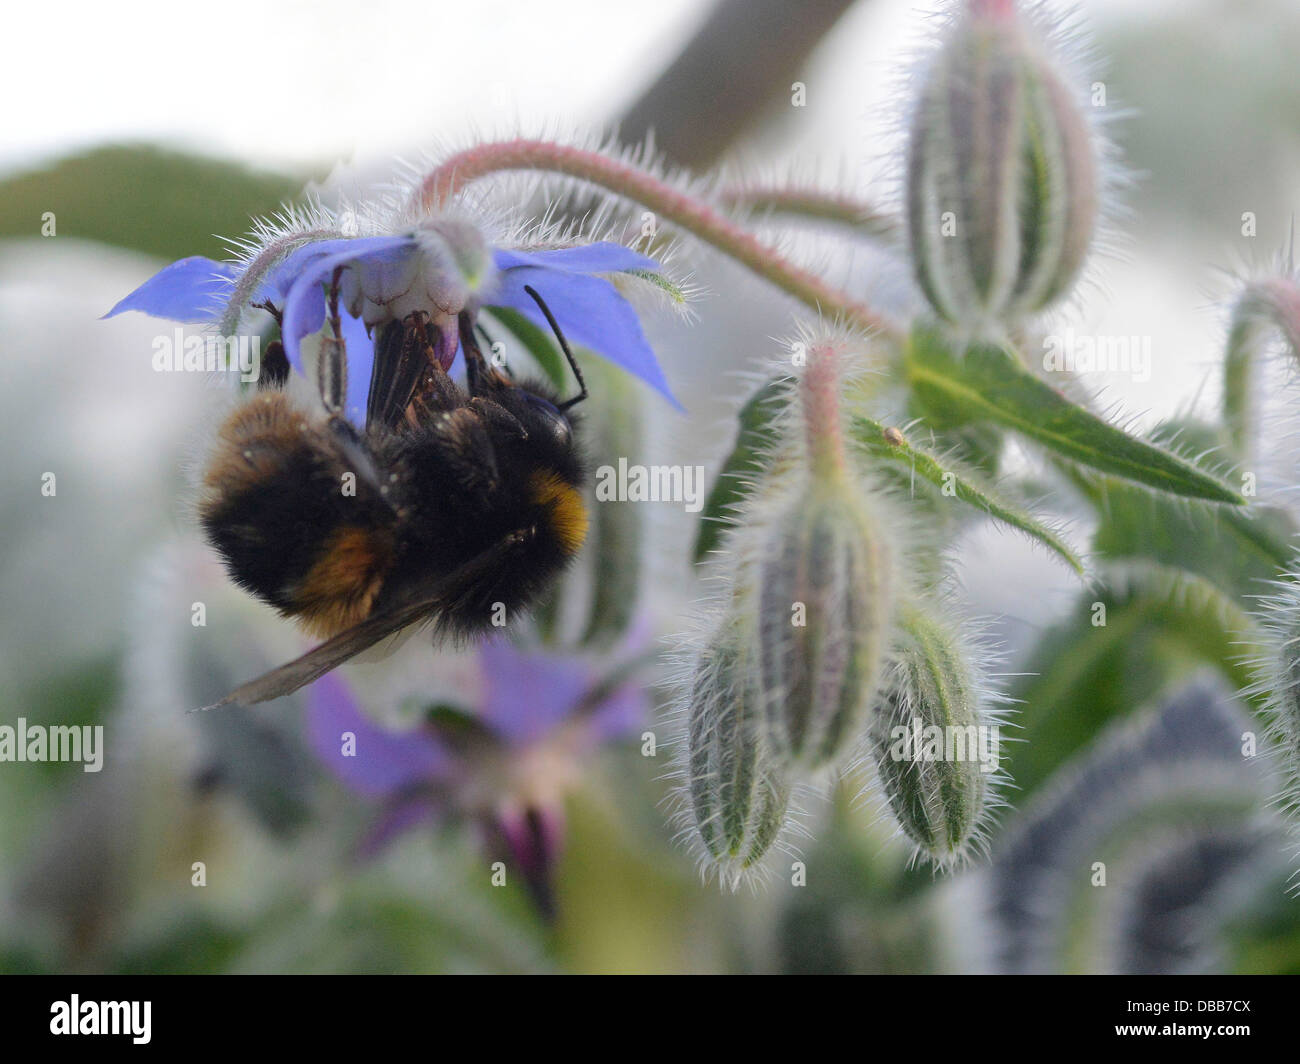 A bumble bee balancing on a borage flower. Stock Photo